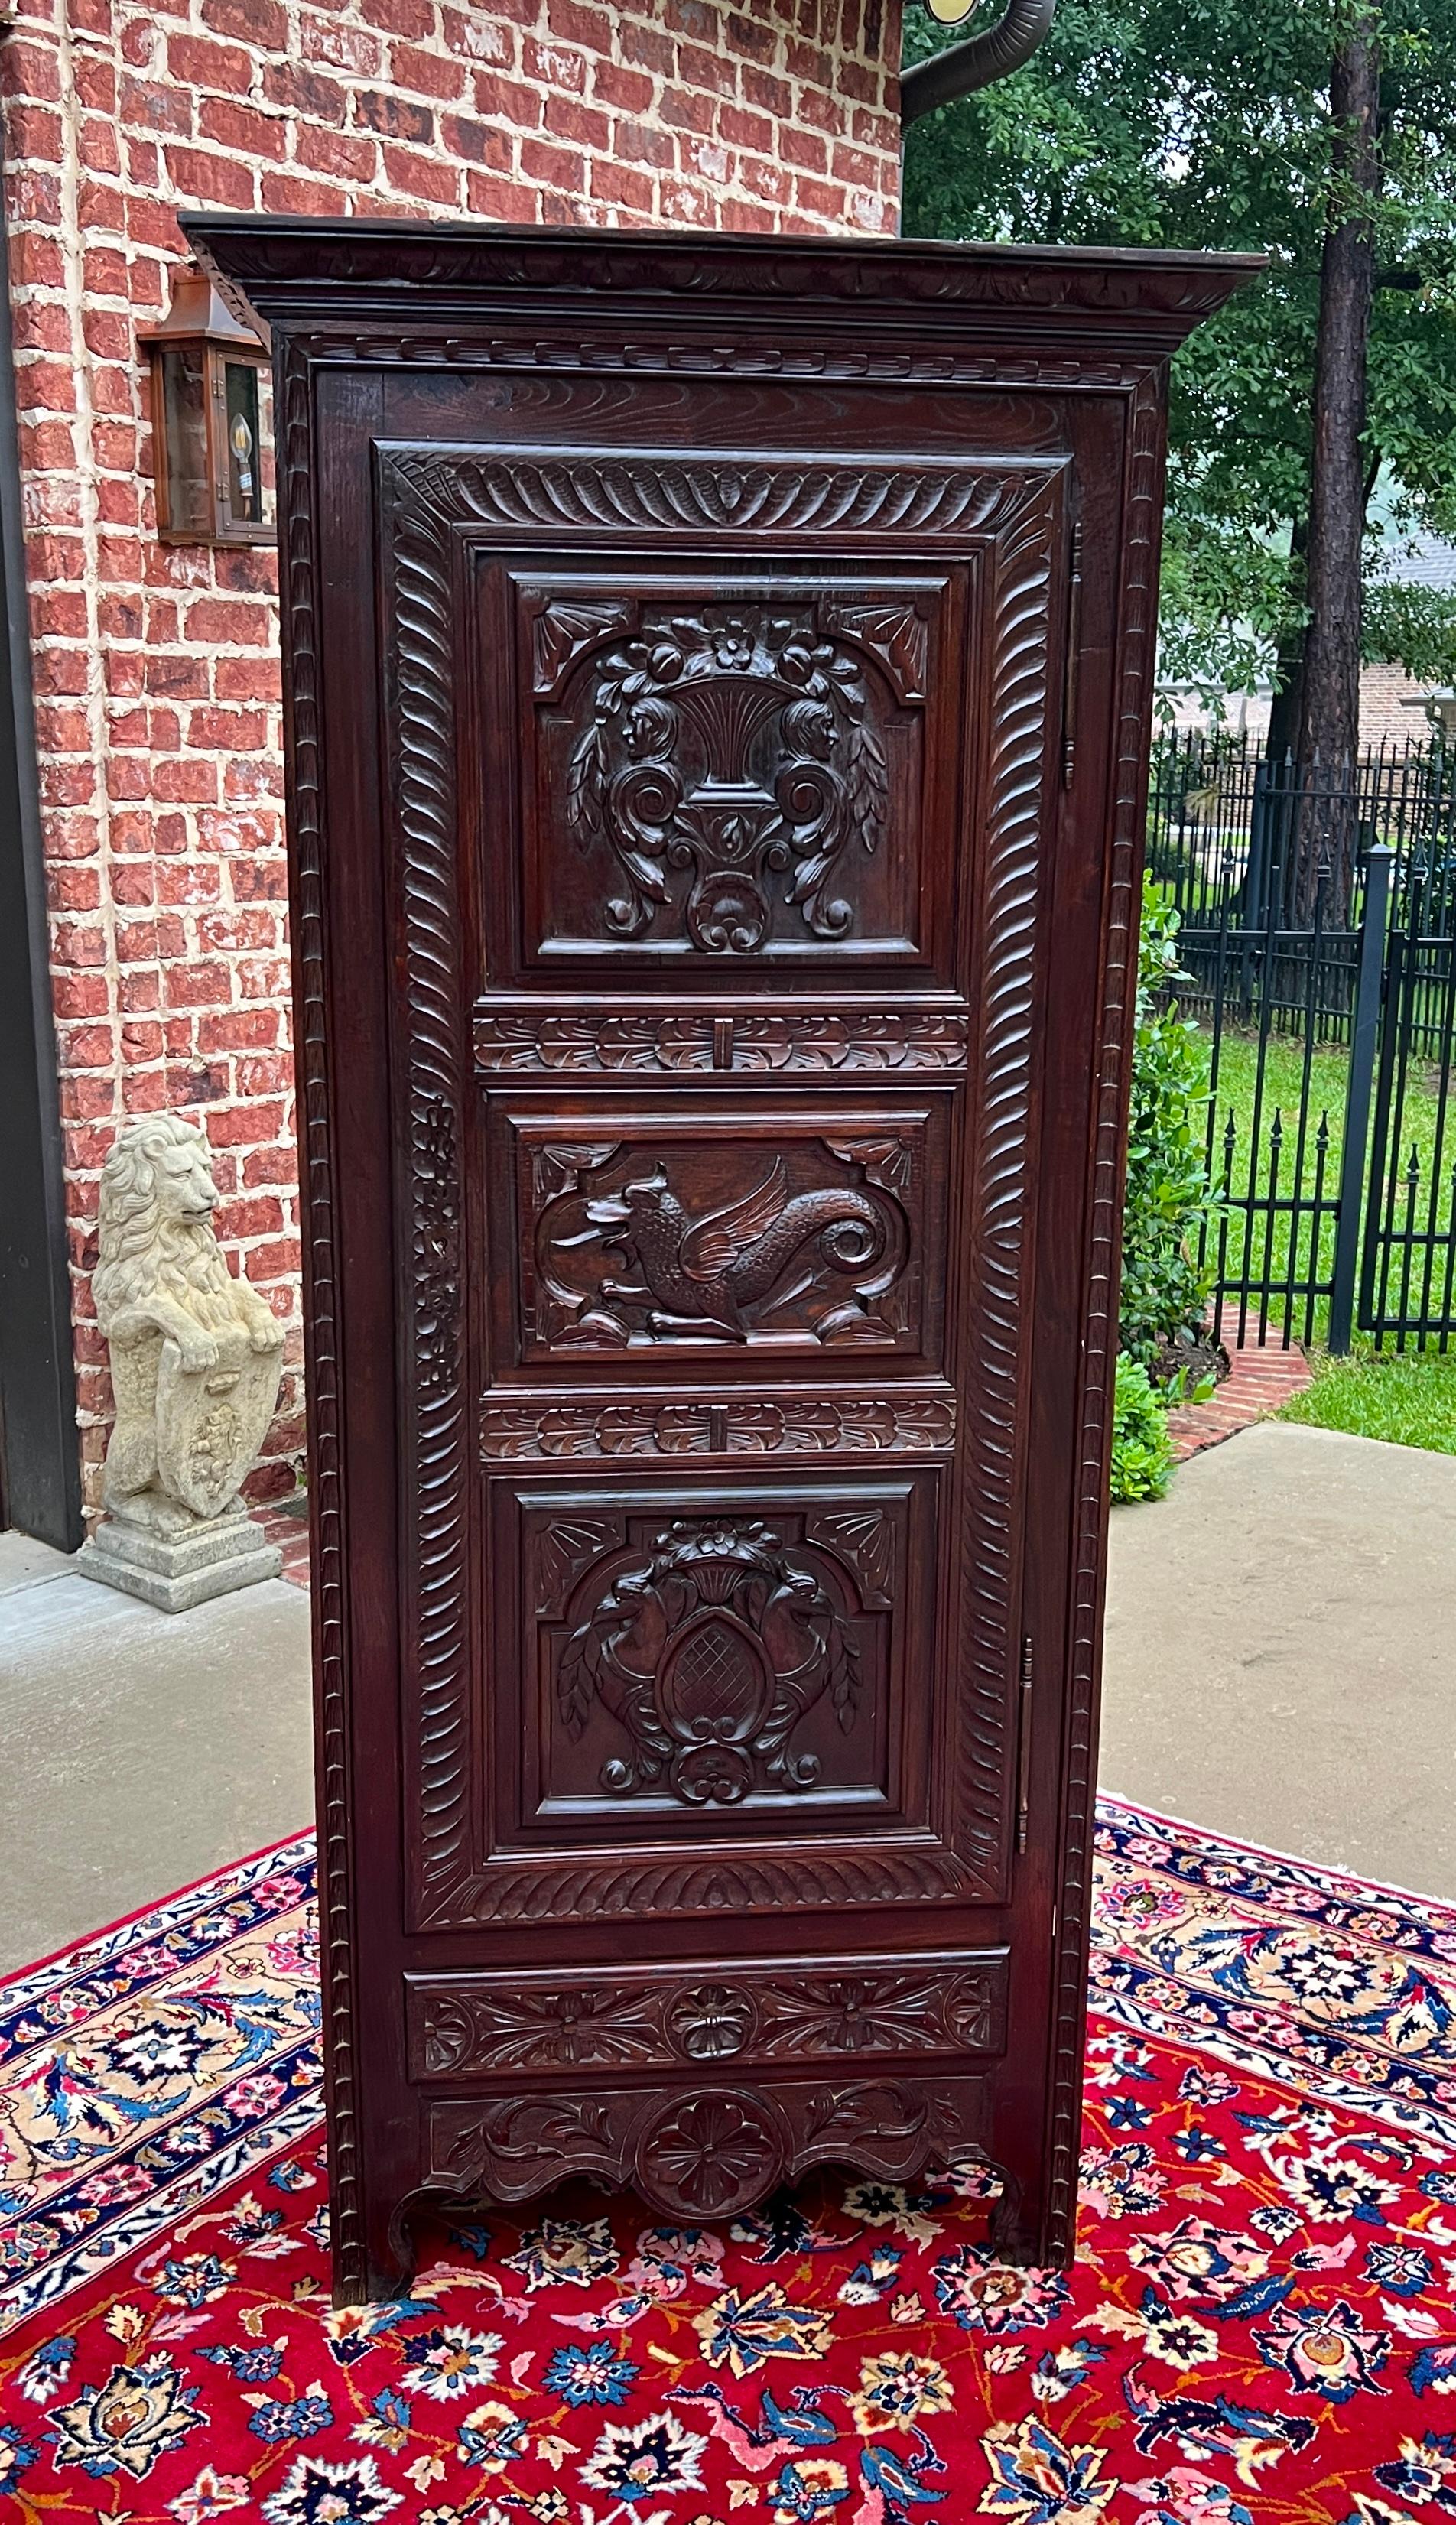 CHARMING Antique French Chestnut Breton Armoire, Wardrobe, Cabinet or Linen Closet with Carved Sides and Lower Drawer~~c. 1900-20s


        BEAUTIFUL STATEMENT PIECE~~ French chestnut armoire or wardrobe or linen cabinet with lower drawer and